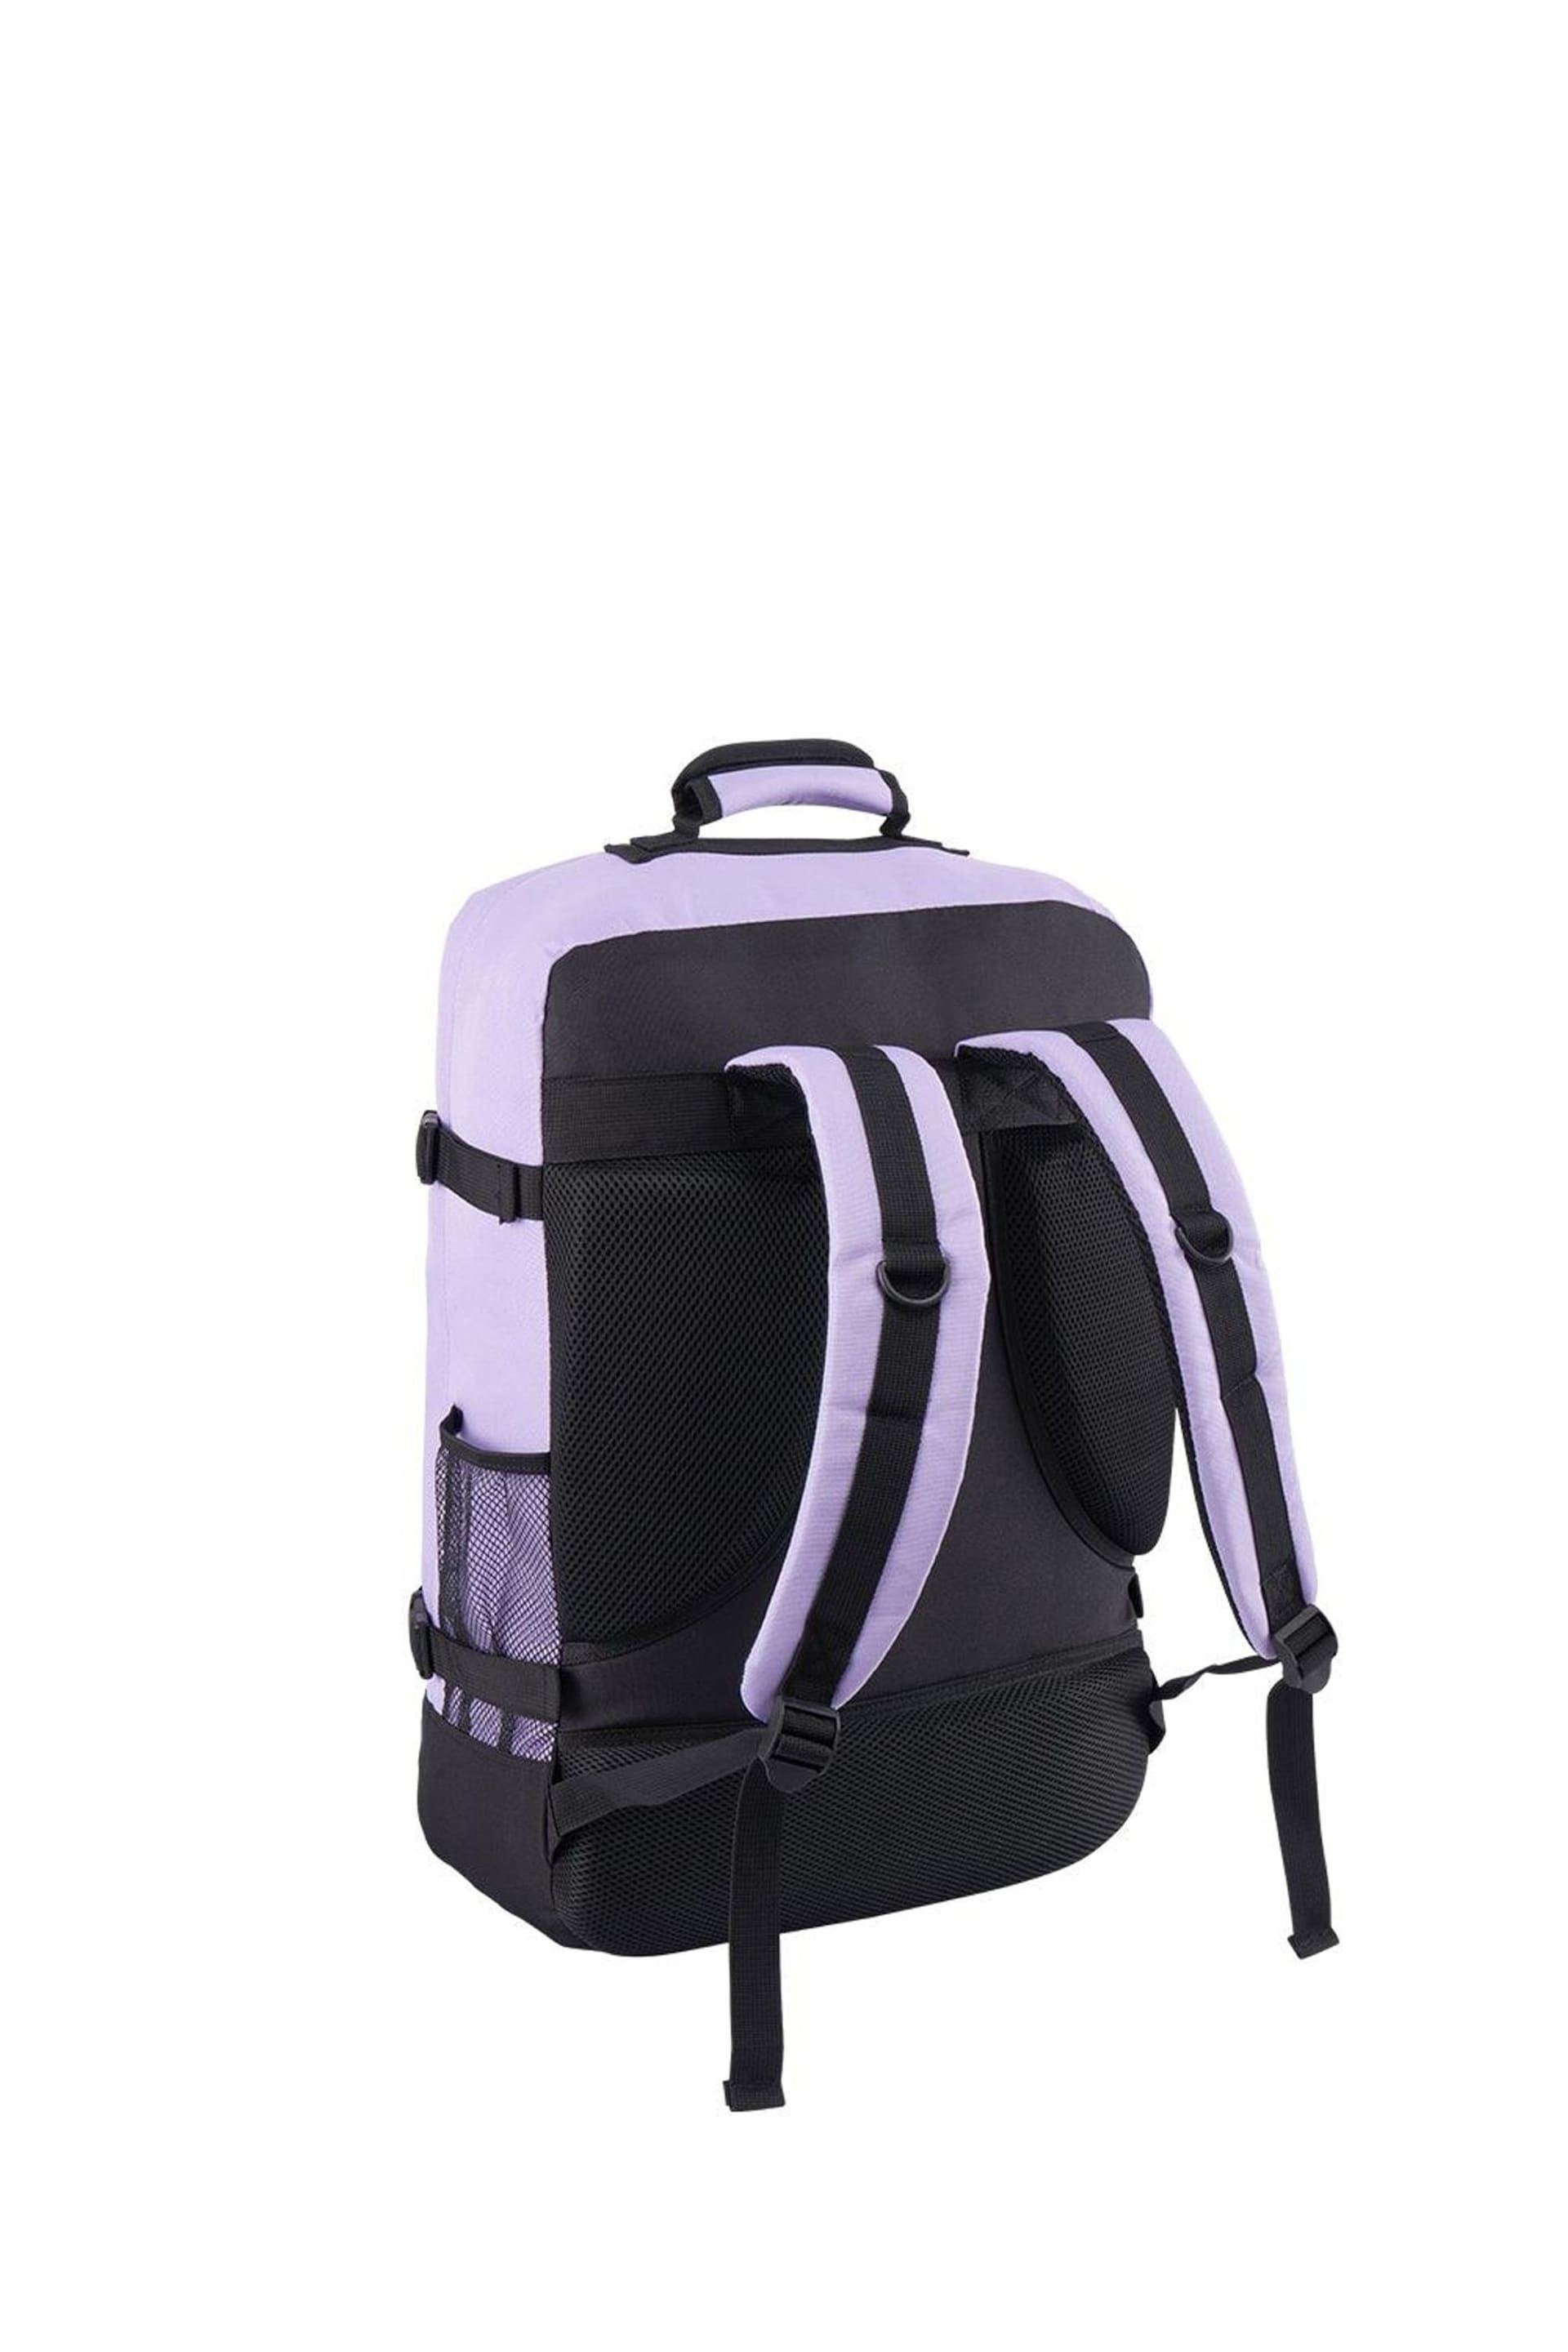 Cabin Max Metz 44L Carry On 55cm Backpack - Image 2 of 4